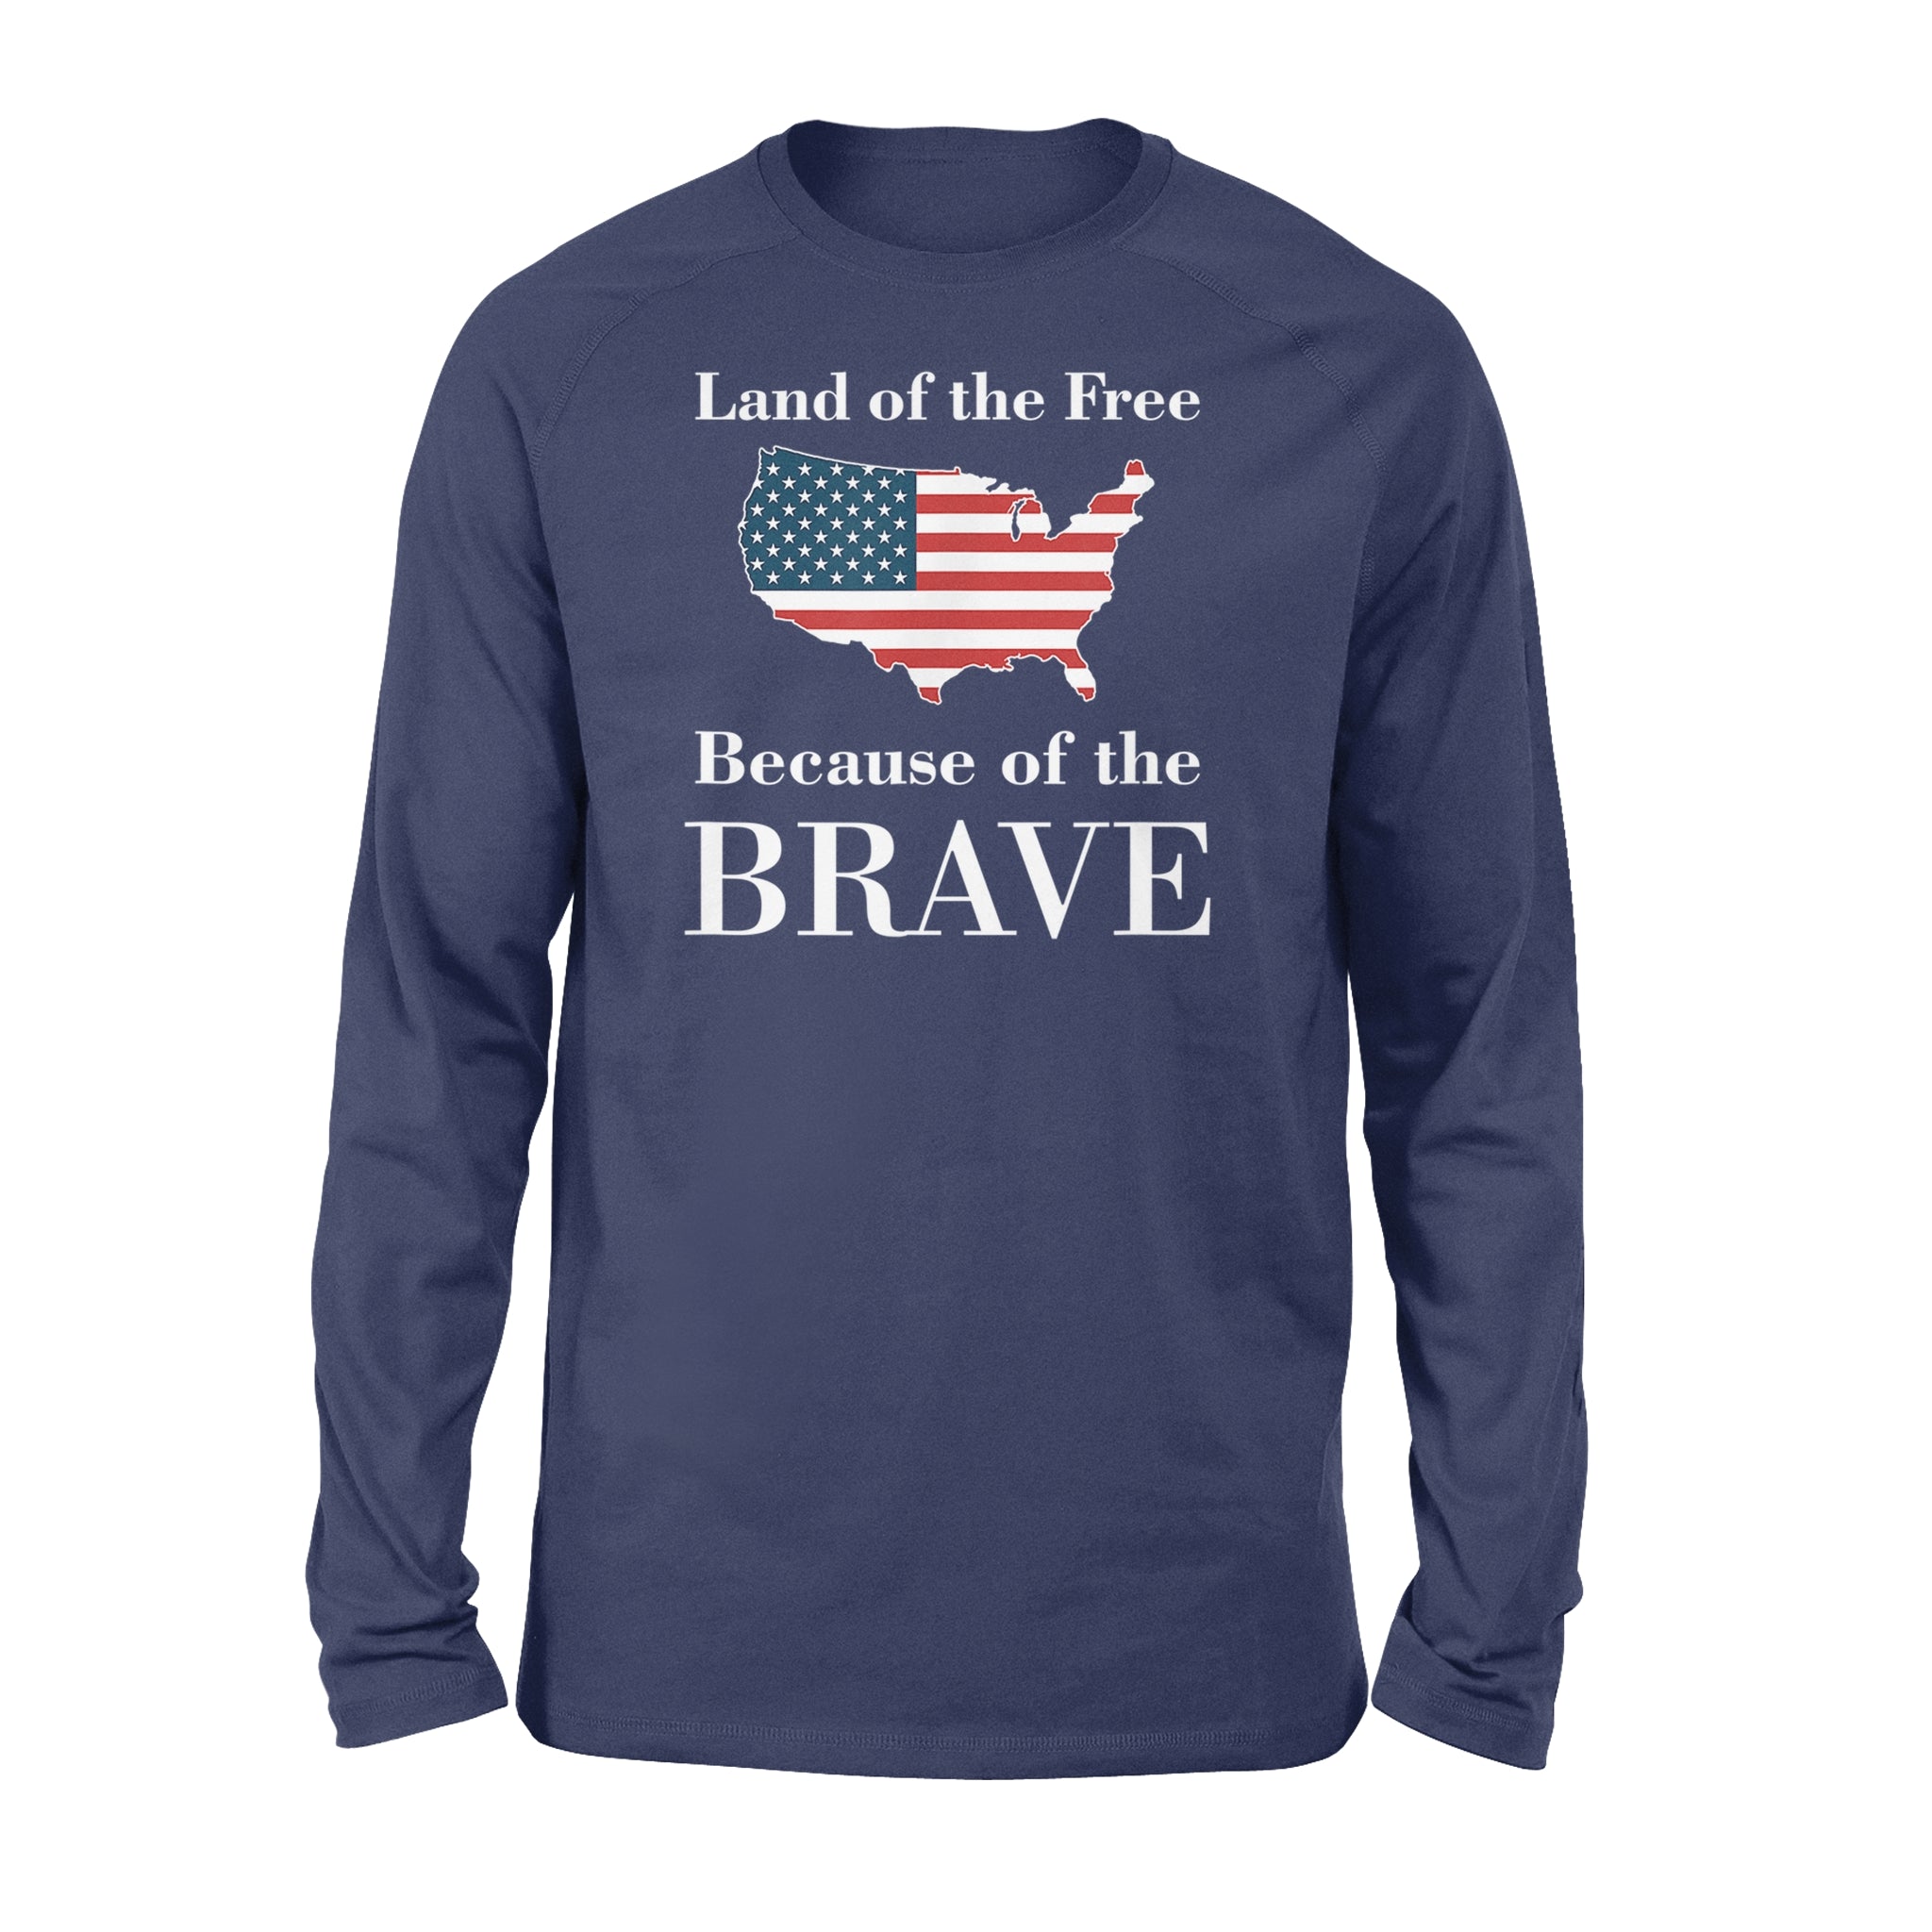 Land of the Free Because of the Brave - Standard Long Sleeve